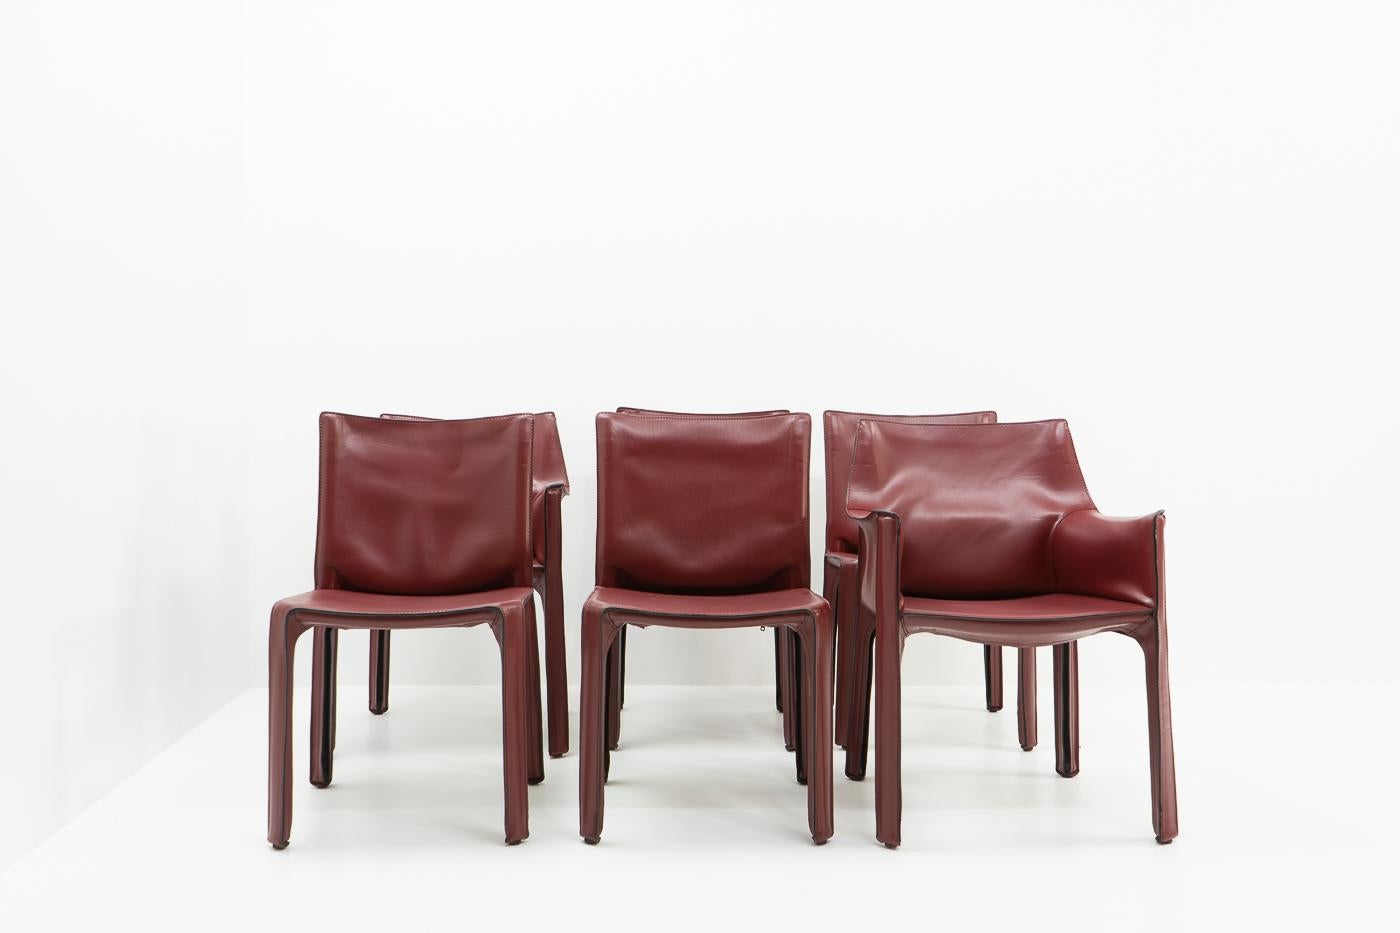 Metal Italian Design Classics, Cab Chairs by Mario Bellini for Cassina, Set of 6 For Sale